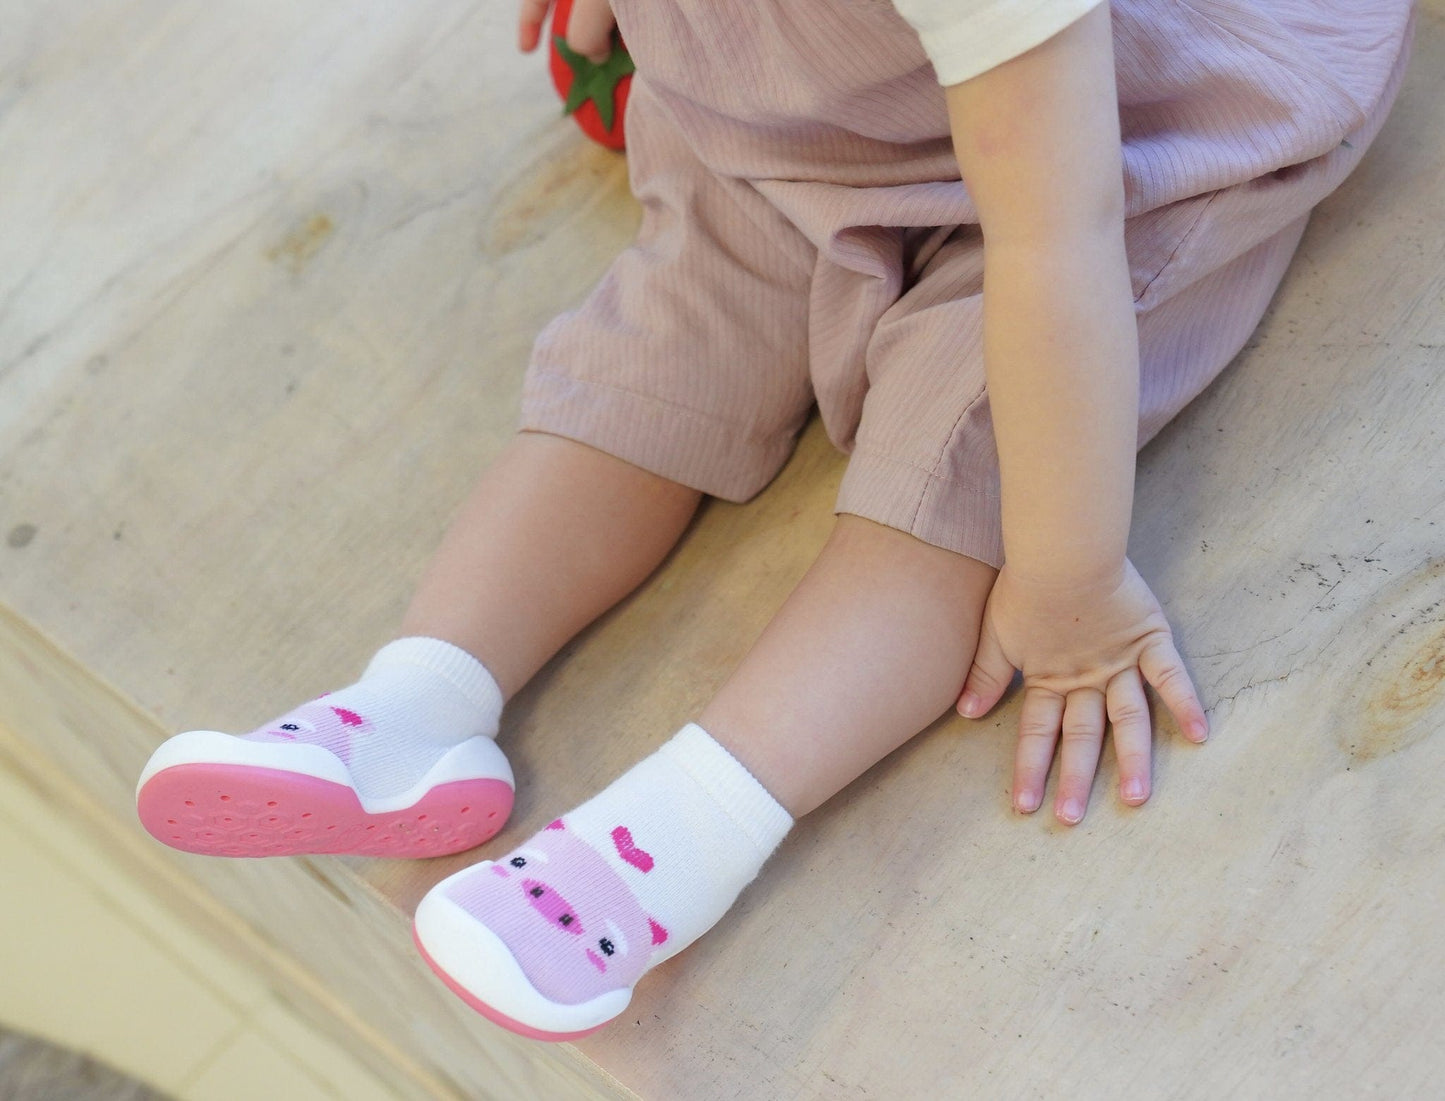 Komuello Heart Pig Baby Rubber Sole Sock Shoes Komuello Heart Pig Baby Rubber Sole Sock Shoes 